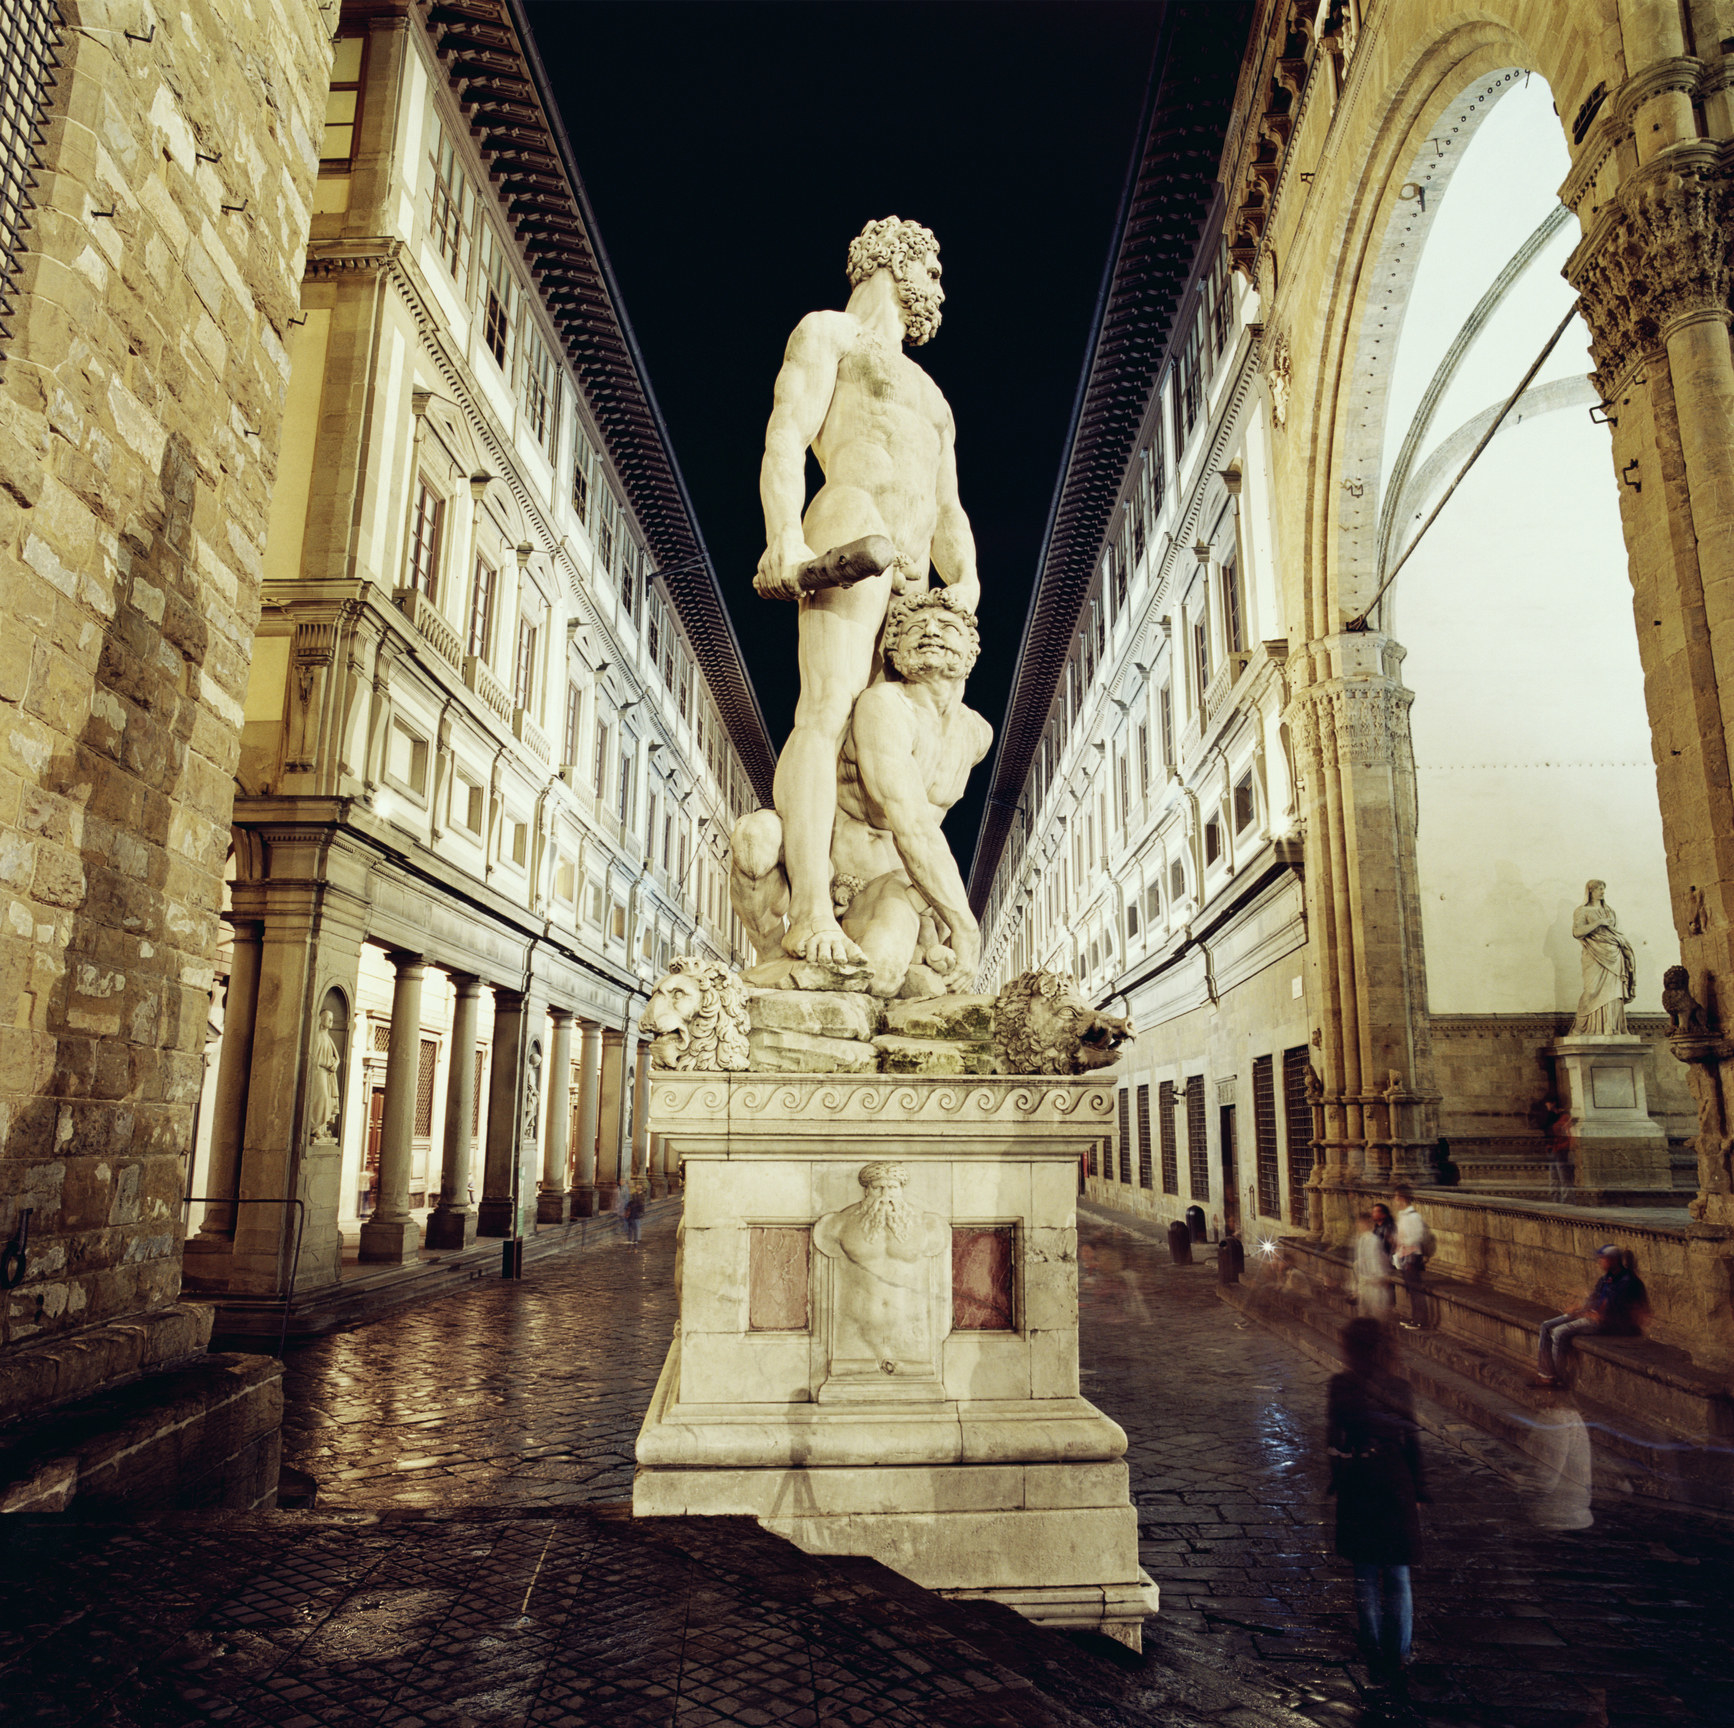 The Uffizi Gallery in Florence.